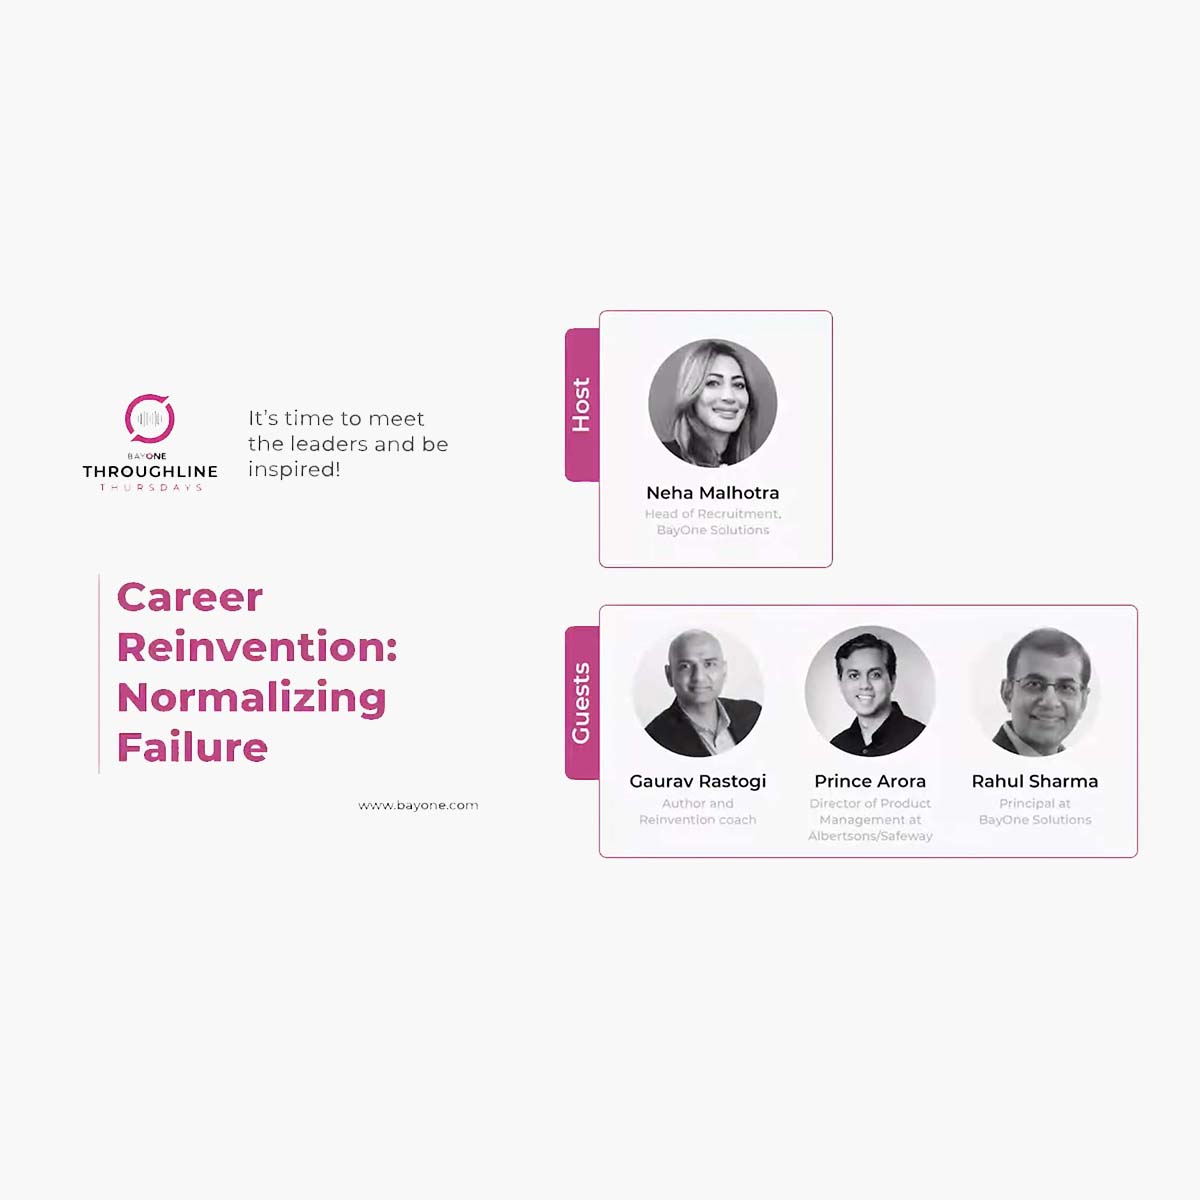 Career Reinvention: Normalizing Failure